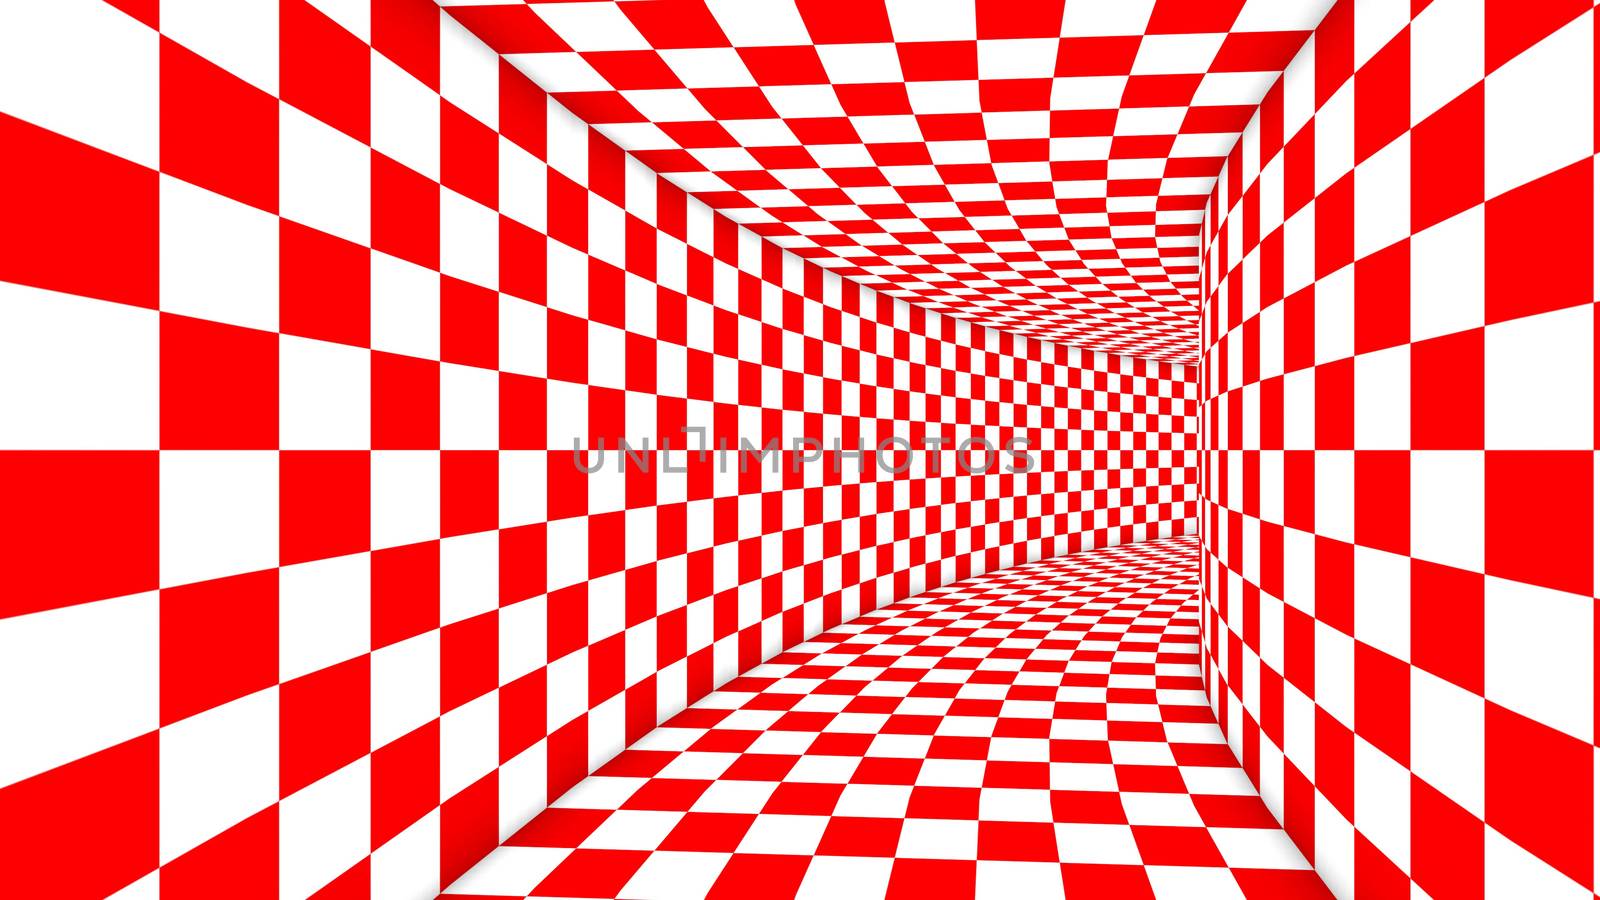 Festive 3d illustration of red and white psychedelic illusion squares making a curvy cubic time portal tunnel. It creates cheerful, exciting and jolly mood.